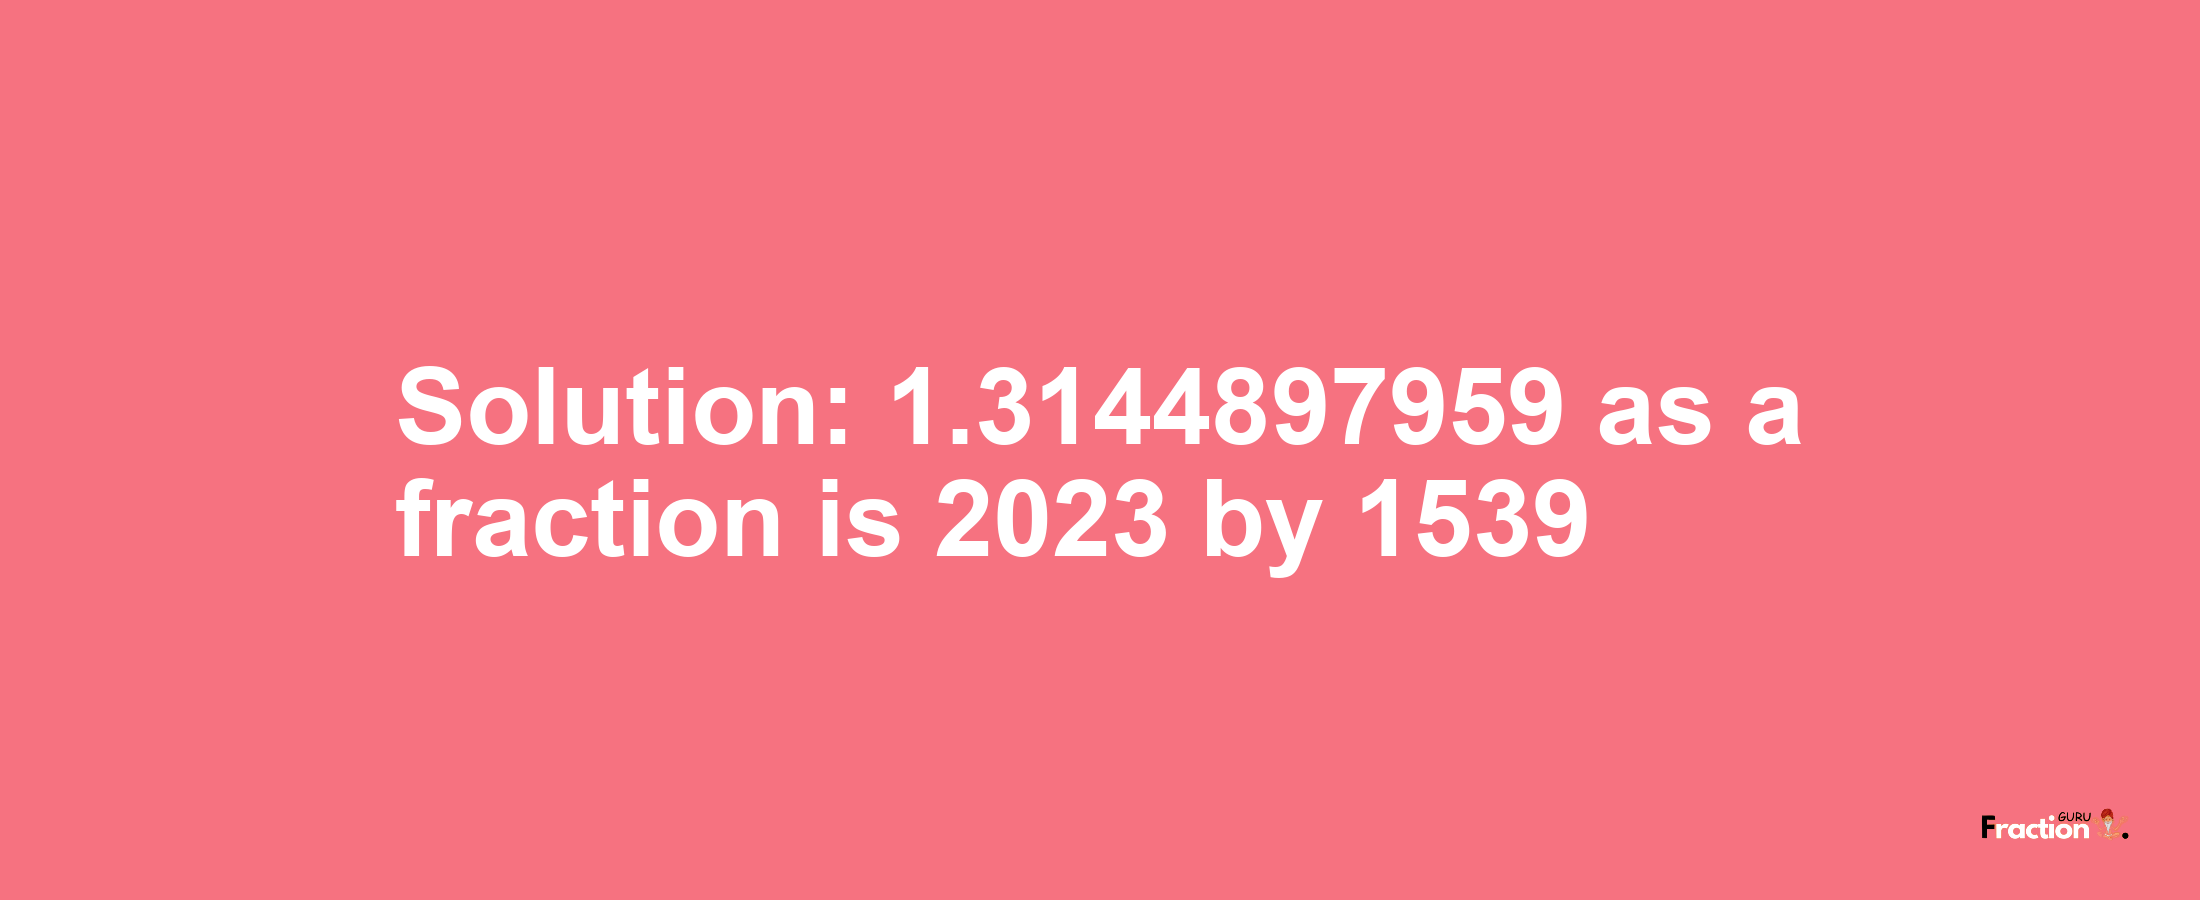 Solution:1.3144897959 as a fraction is 2023/1539